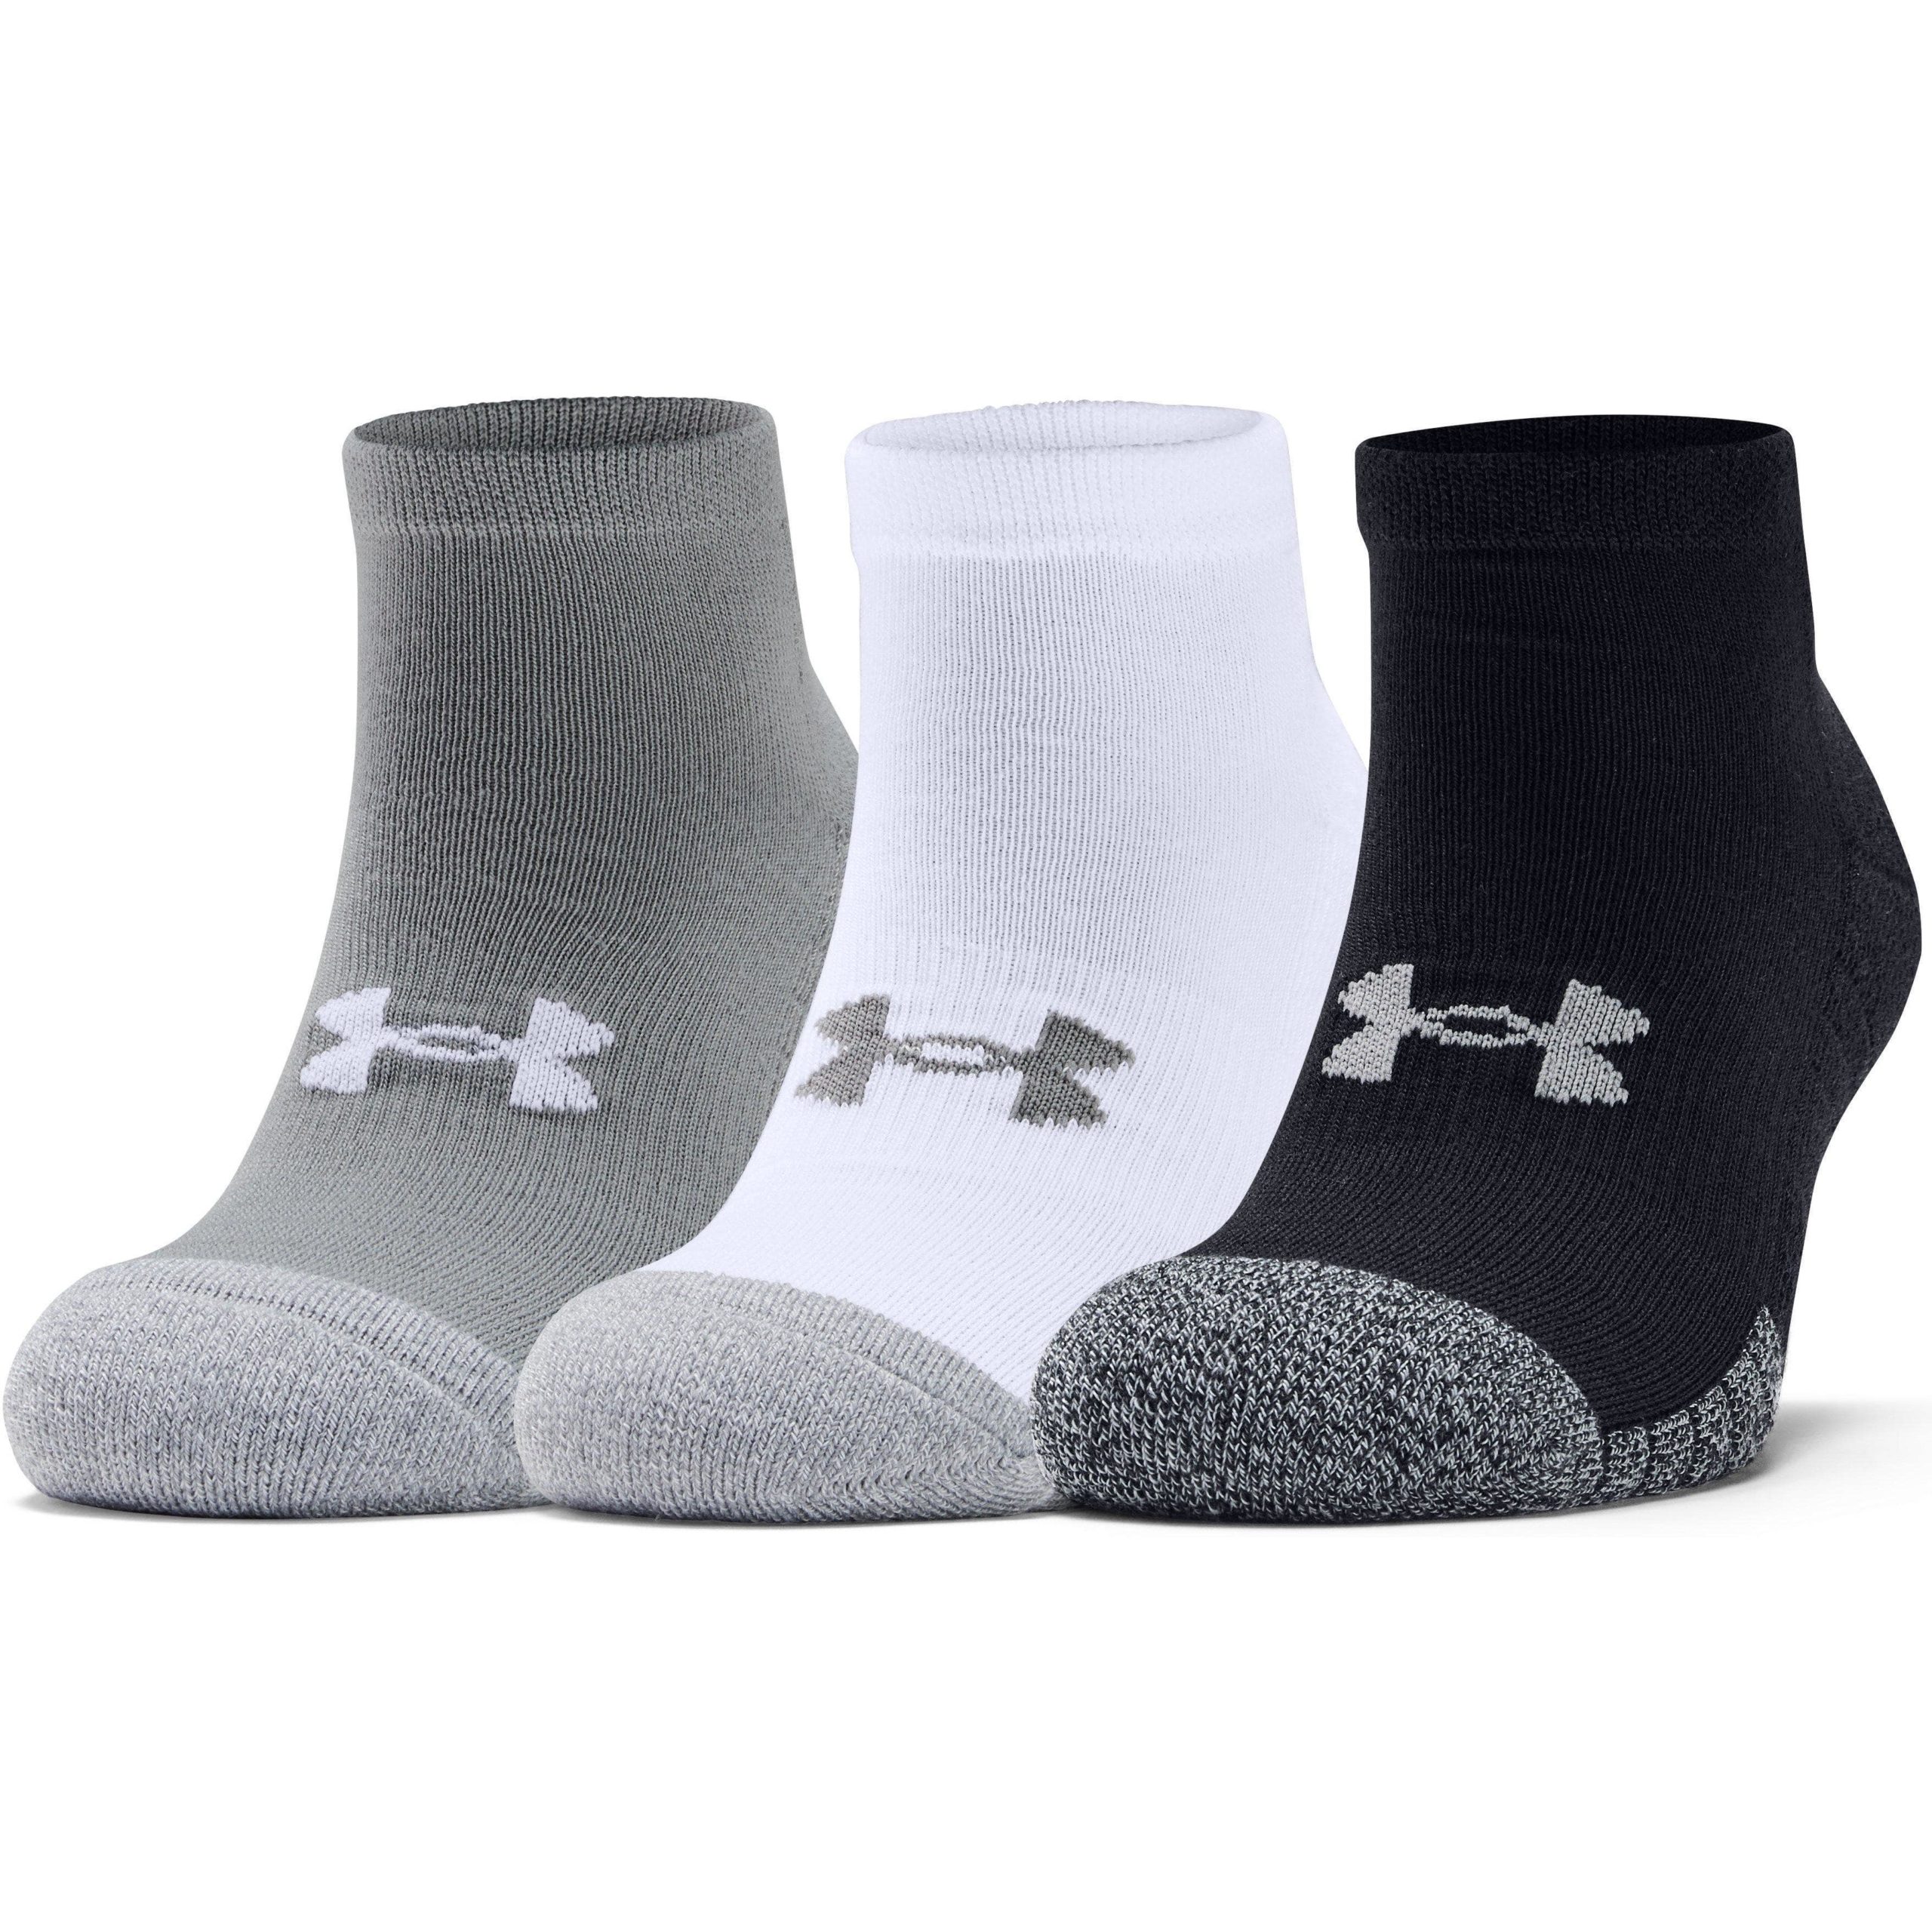 Under Armour Low Cut Golf Socks (3 Pack) - MB Performance Golf